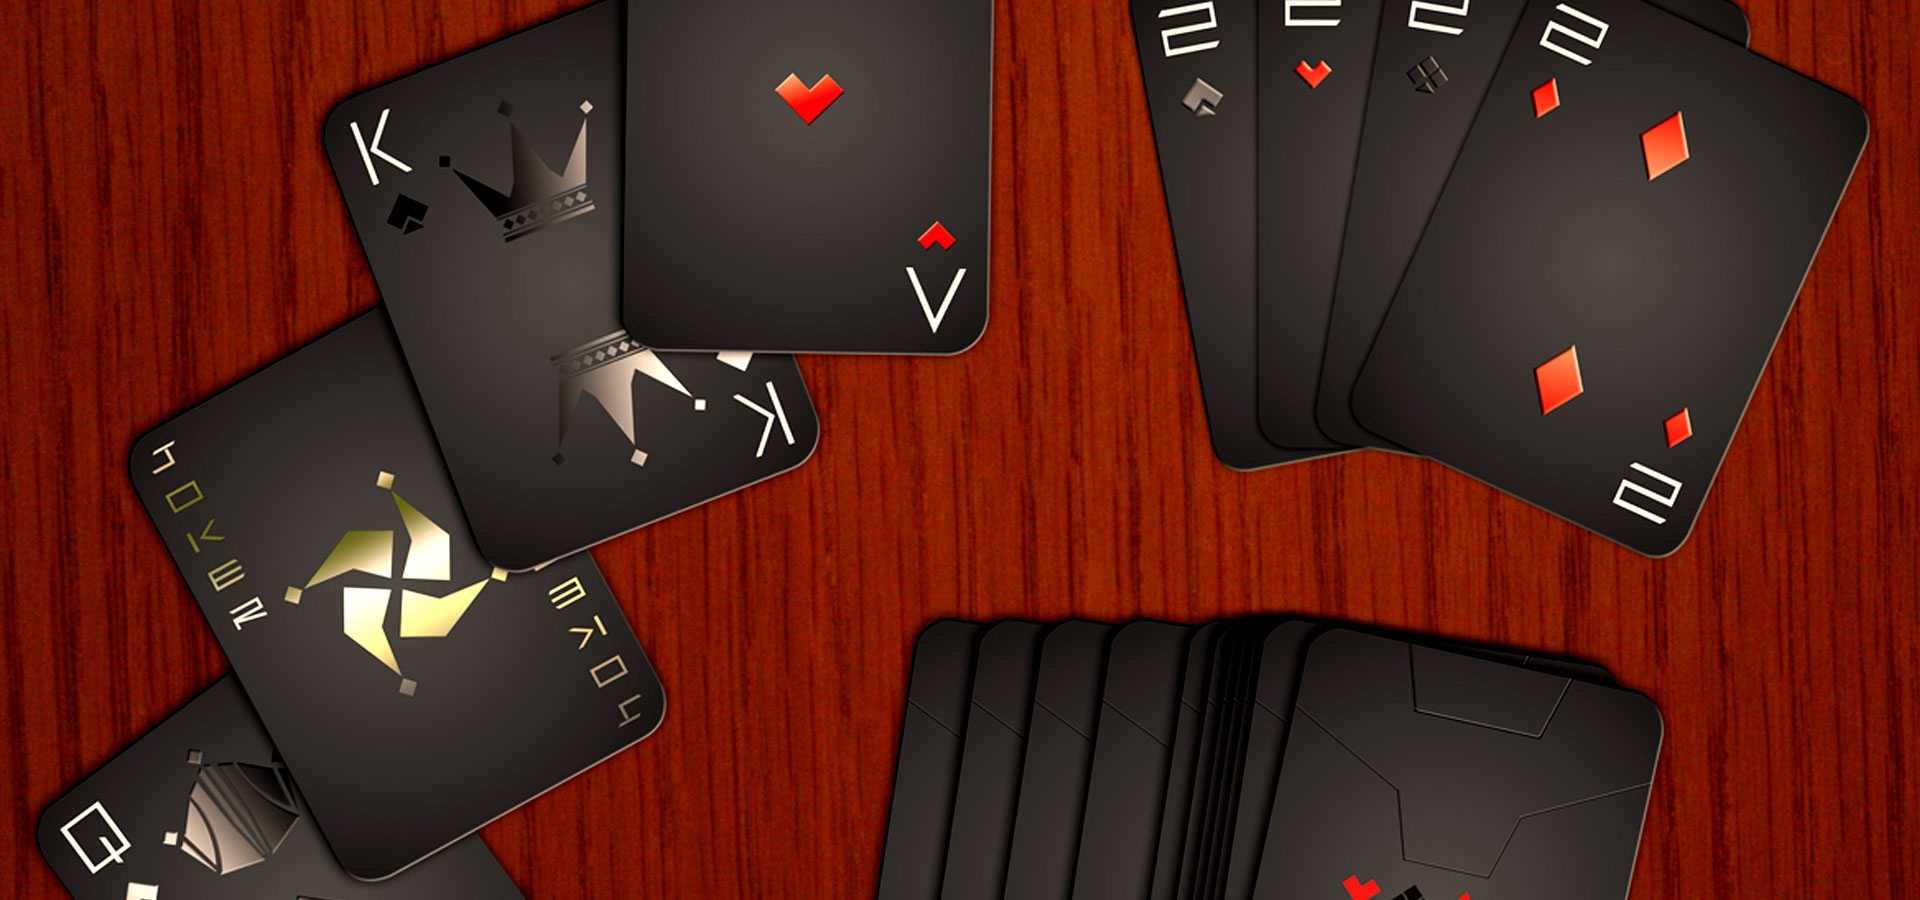 22+ Playing Card Designs | Free & Premium Templates In Deck Of Cards Template